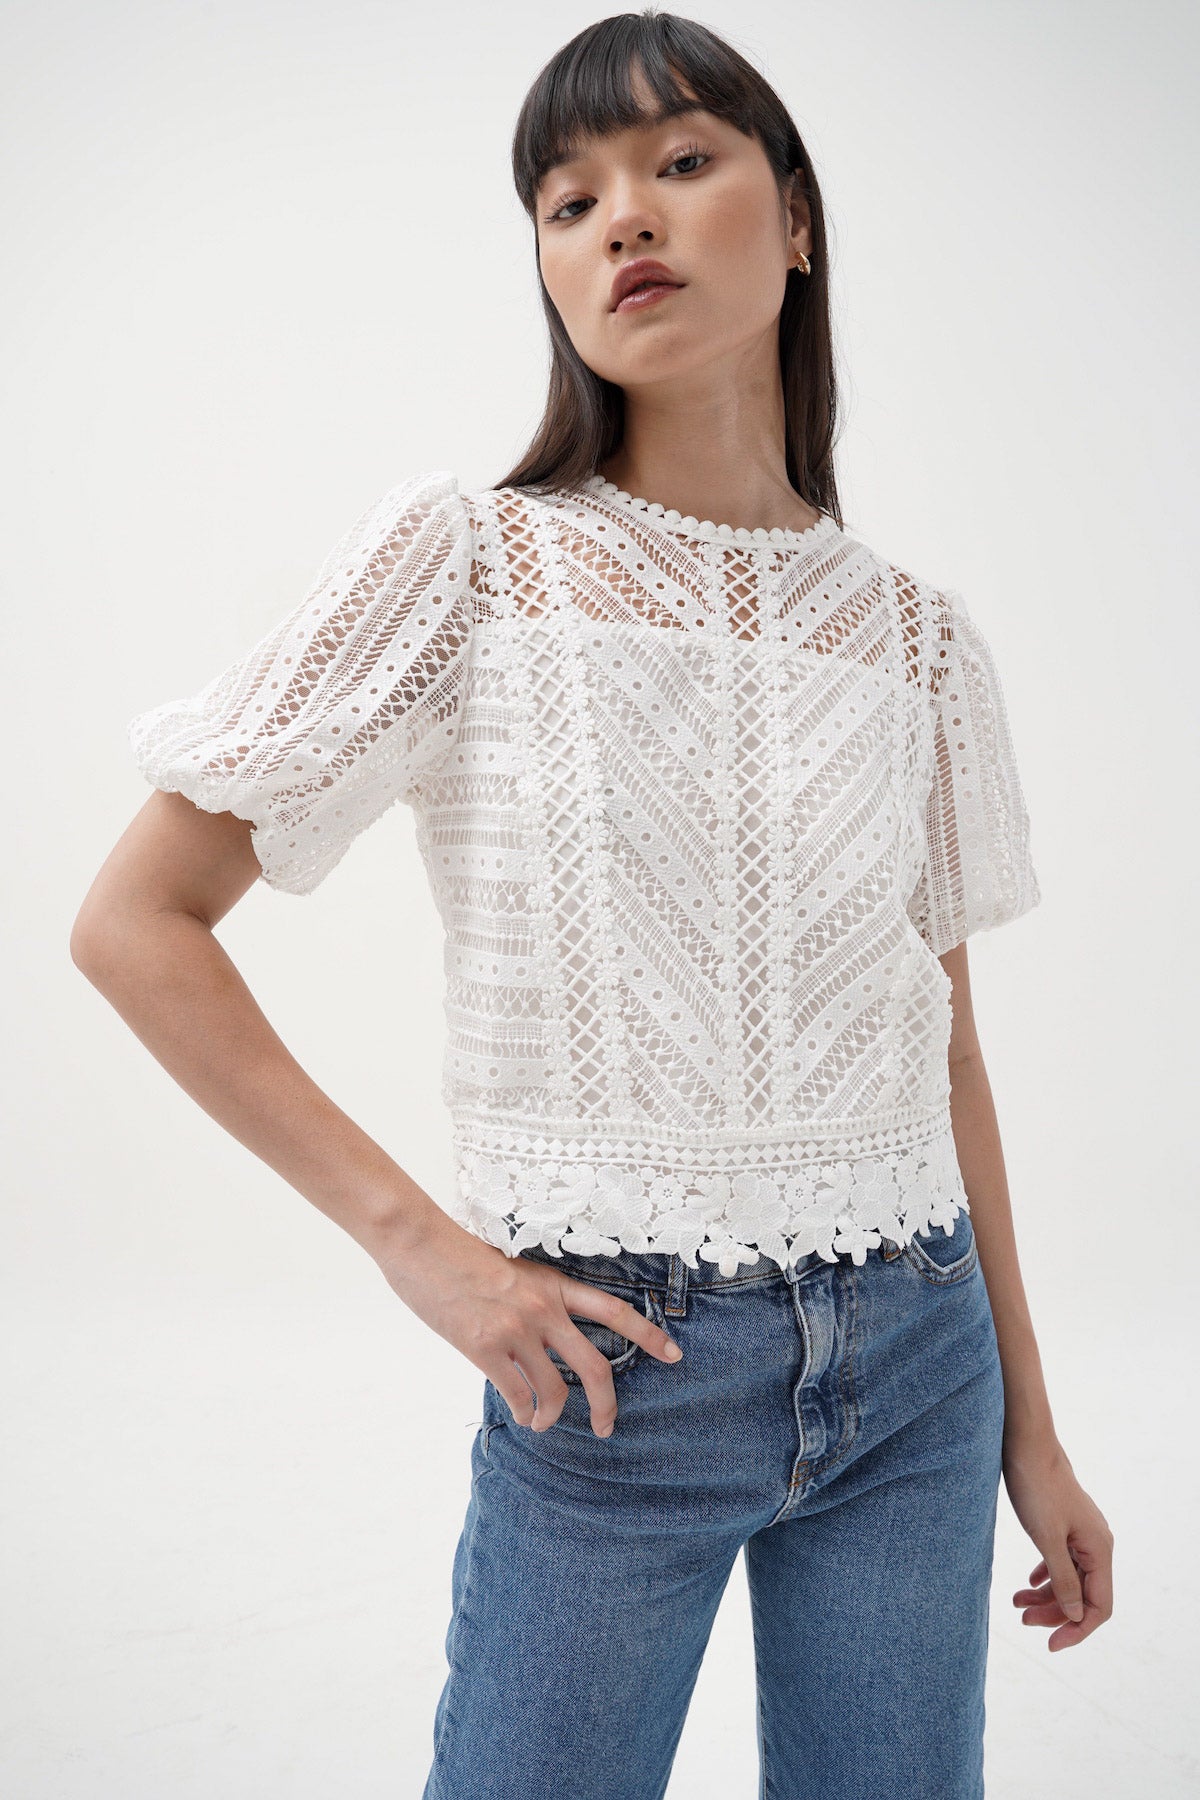 Mael Top In White (2 Left)